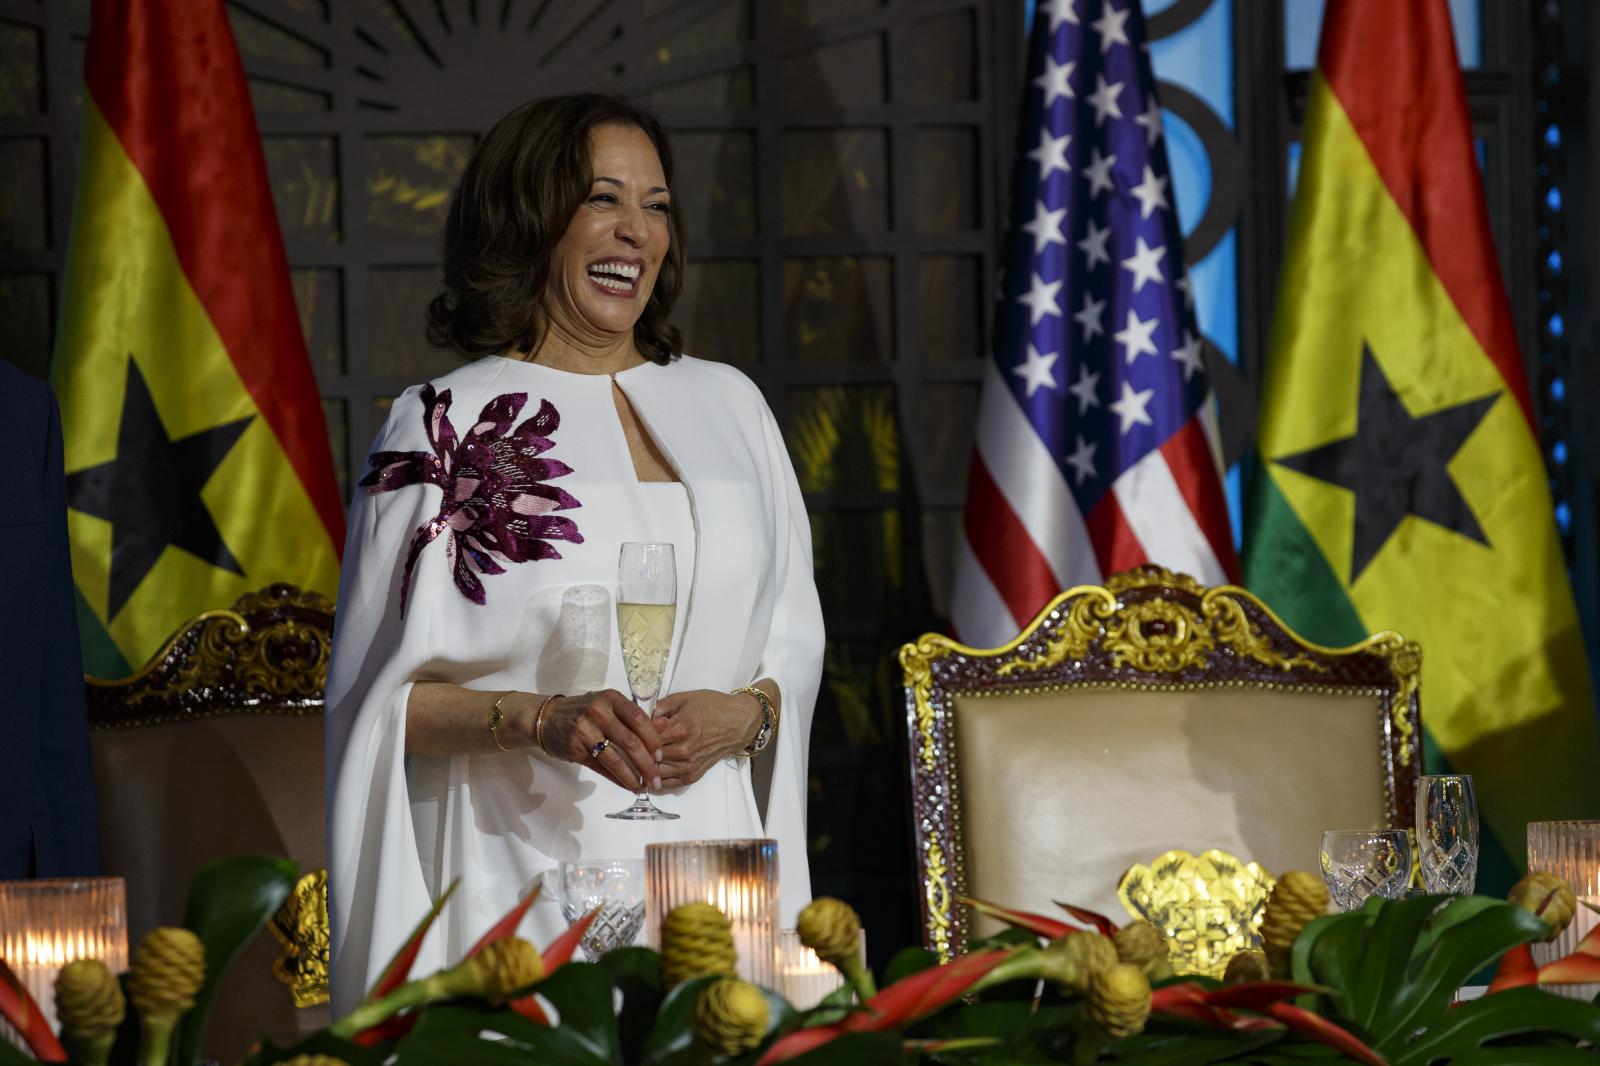 Image from U.S. Vice President Kamala Harris Visit To Ghana - U.S. Vice President Kamala Harris laughs during a state...